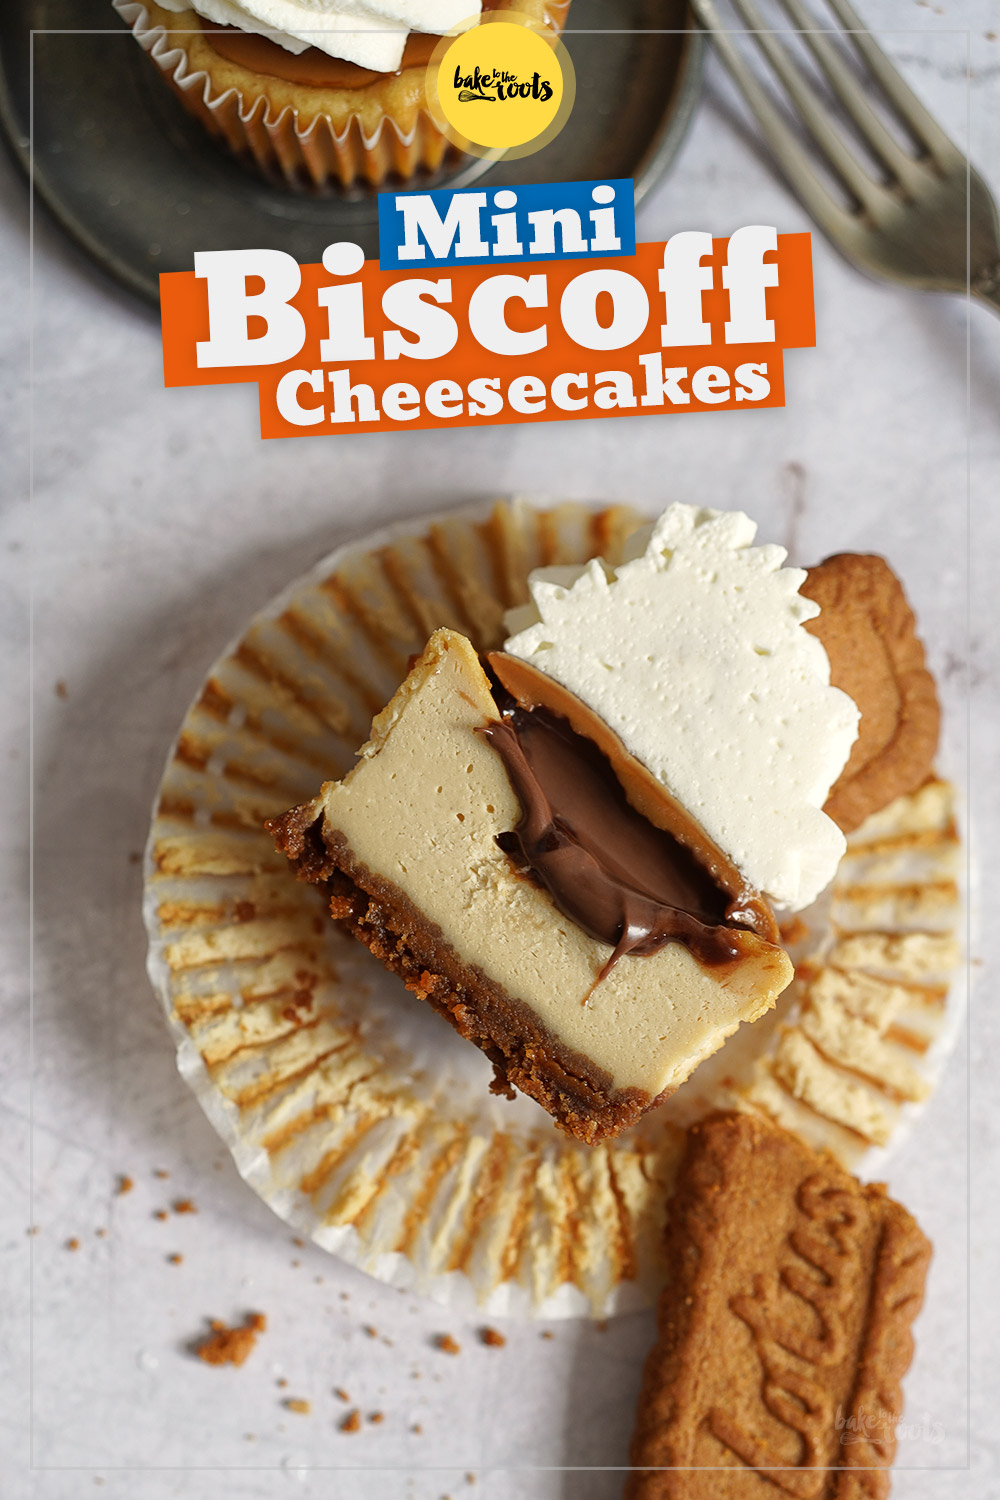 Mini Biscoff Cheesecakes | Bake to the roots